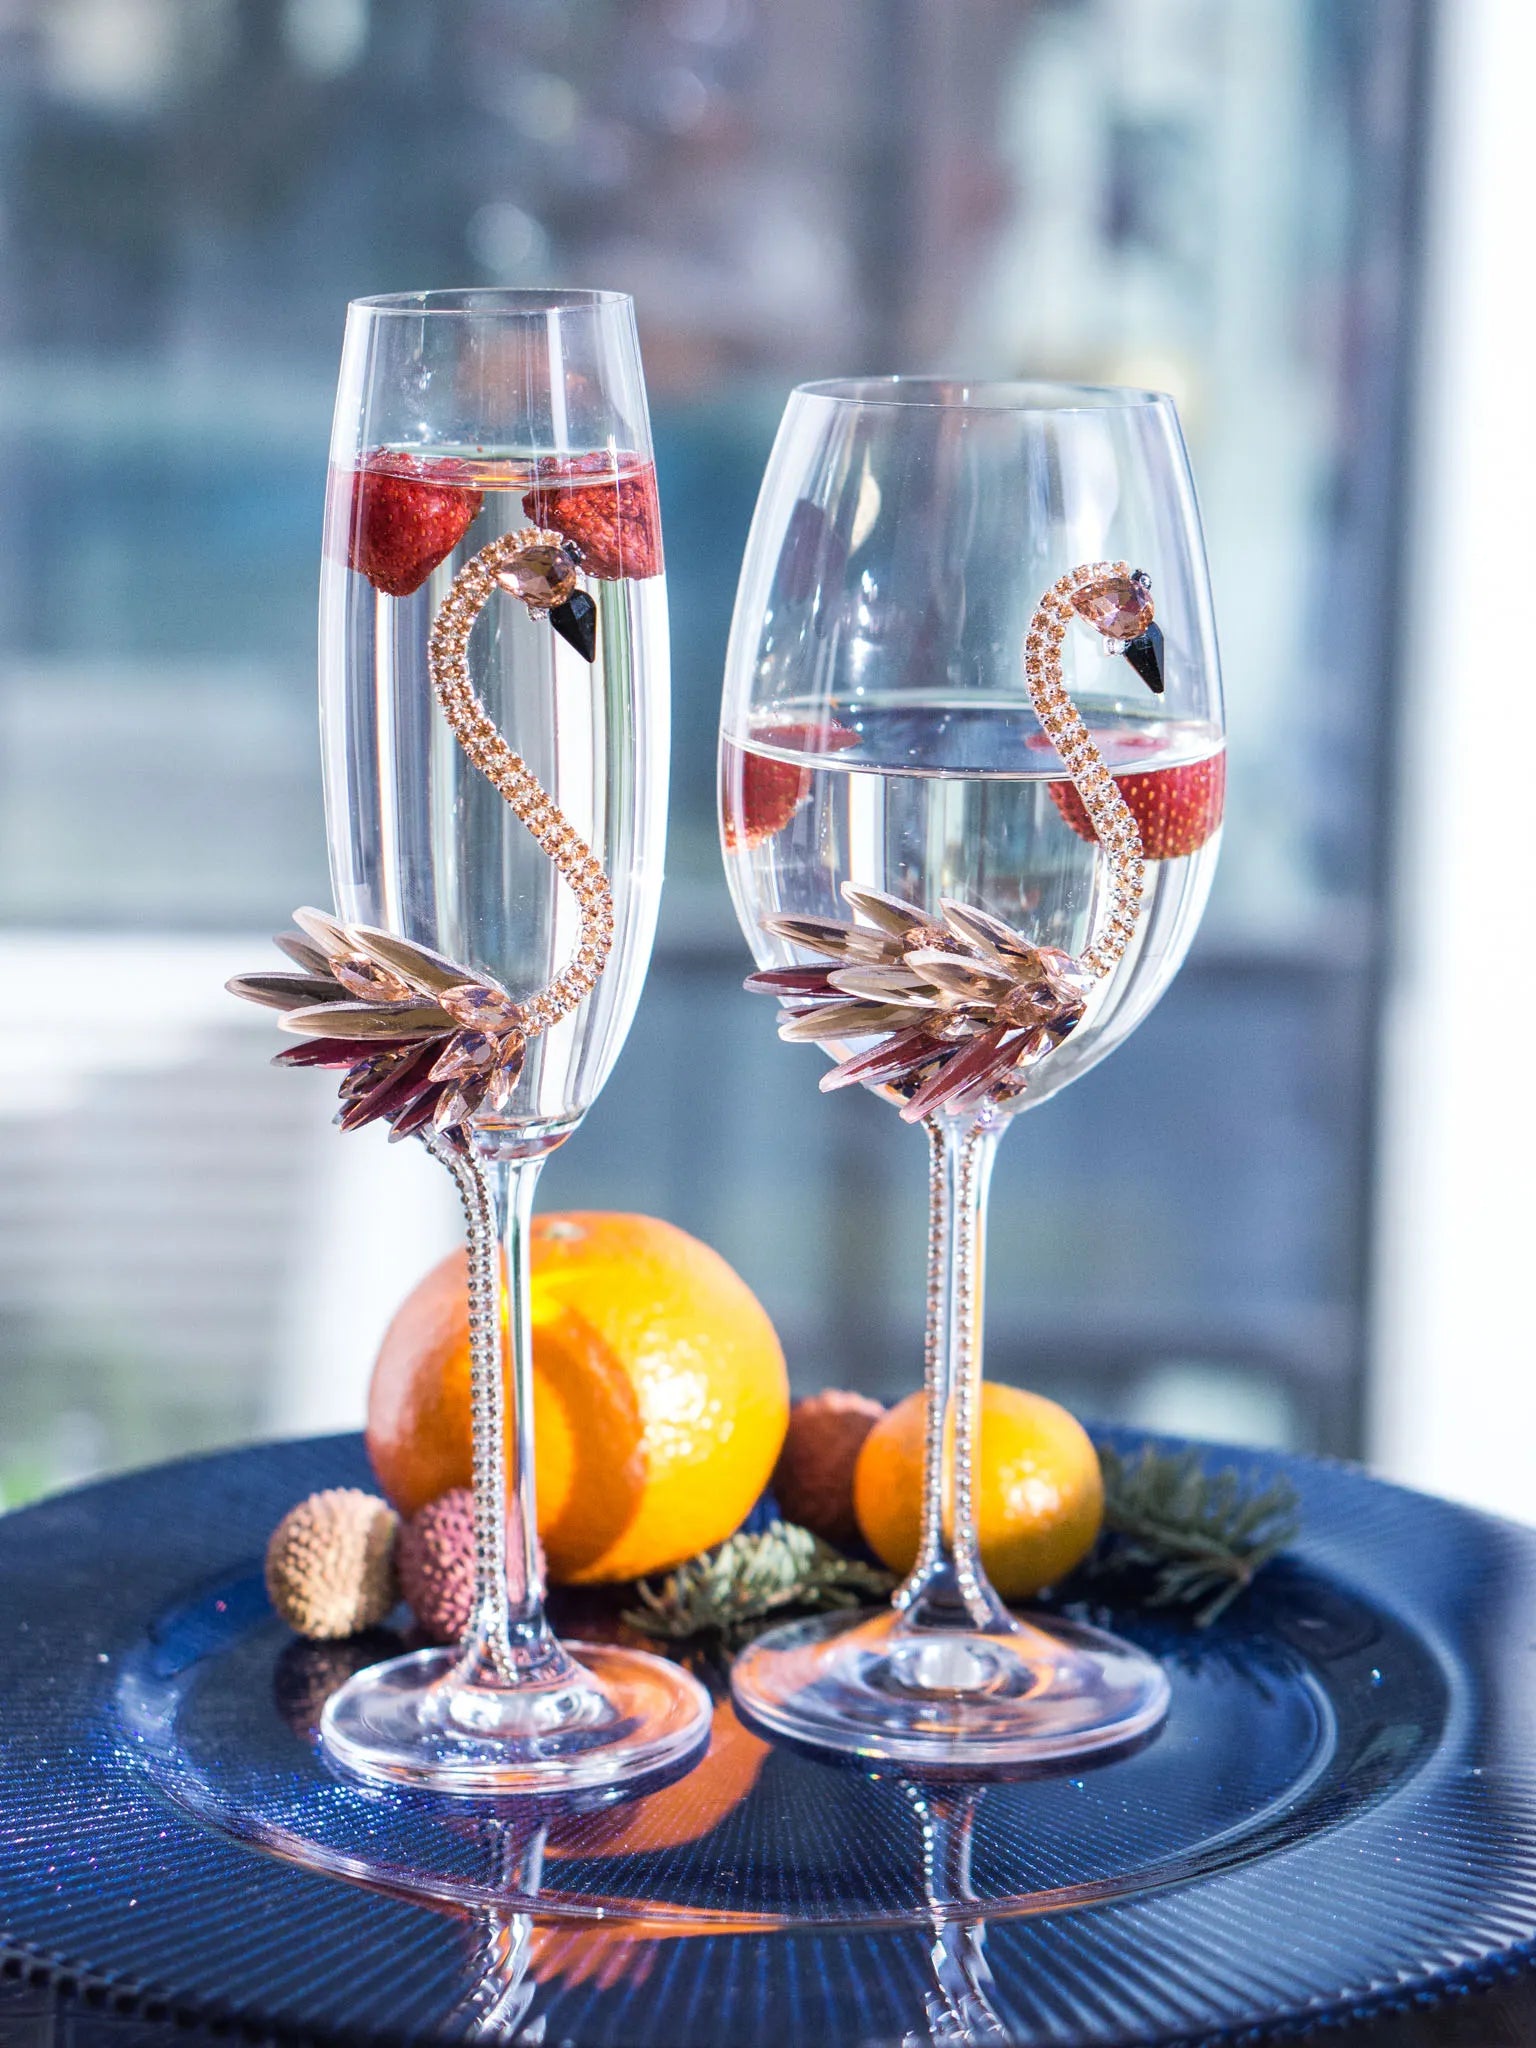 Elegant crystal pink flamingo champagne flutes and personalized wine glasses, ideal for adding a touch of uniqueness and personal flair to celebrations.